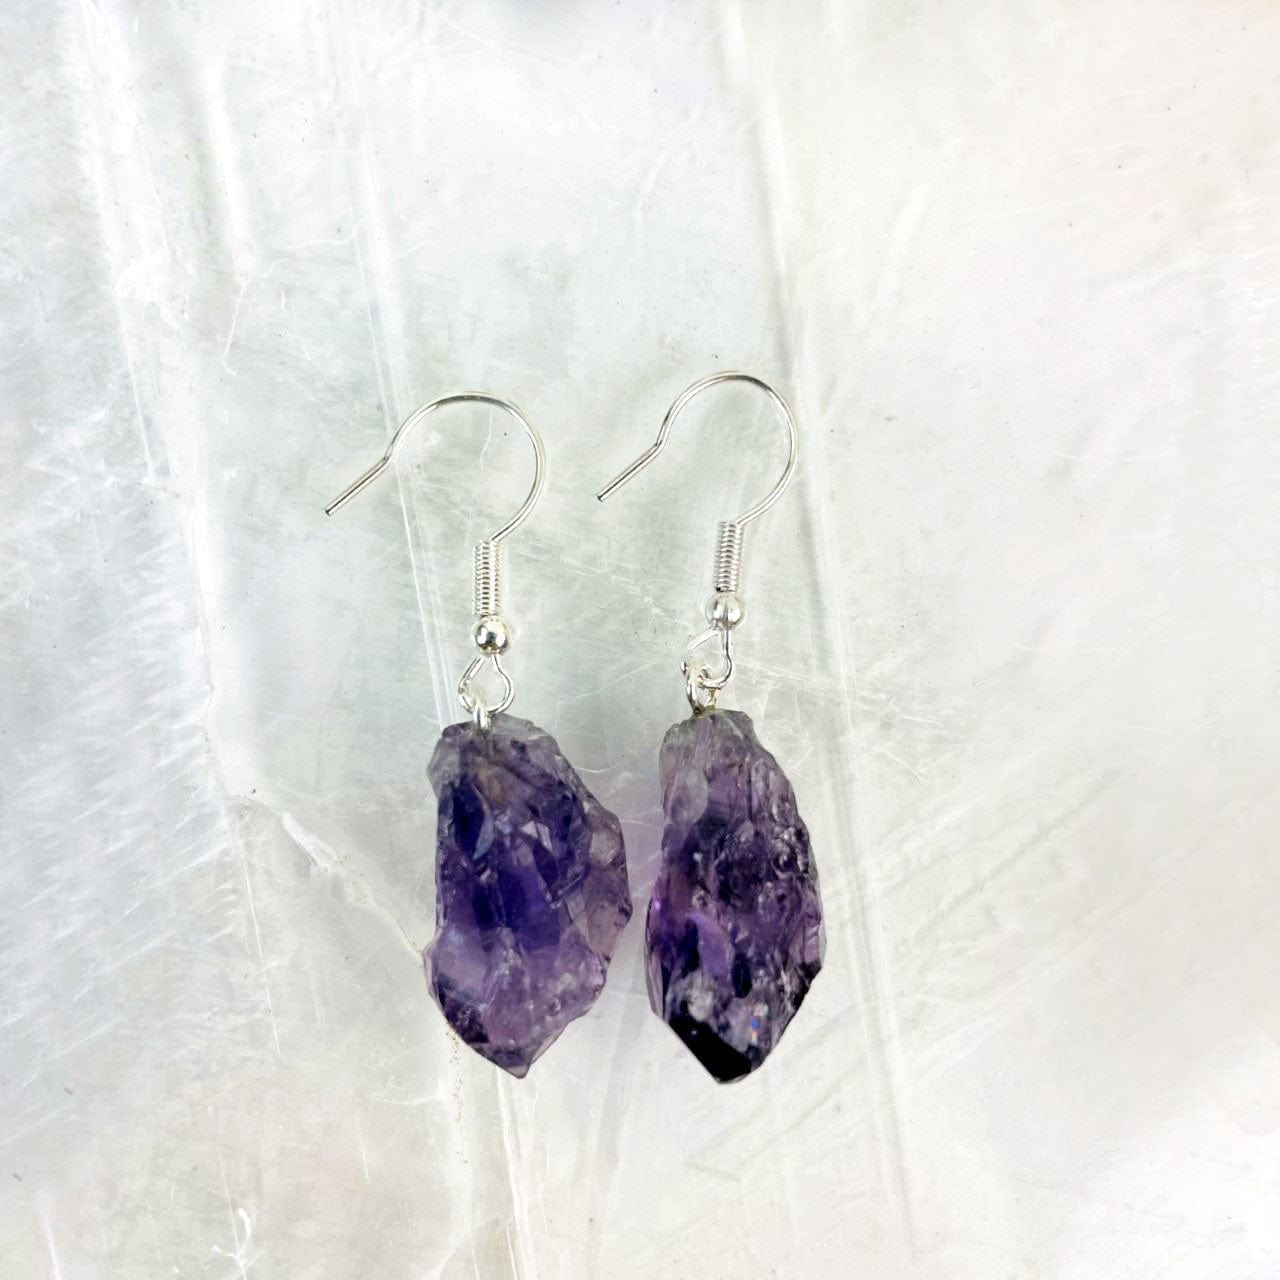 Close up of amethyst point earrings silver plated on a selenite slab.